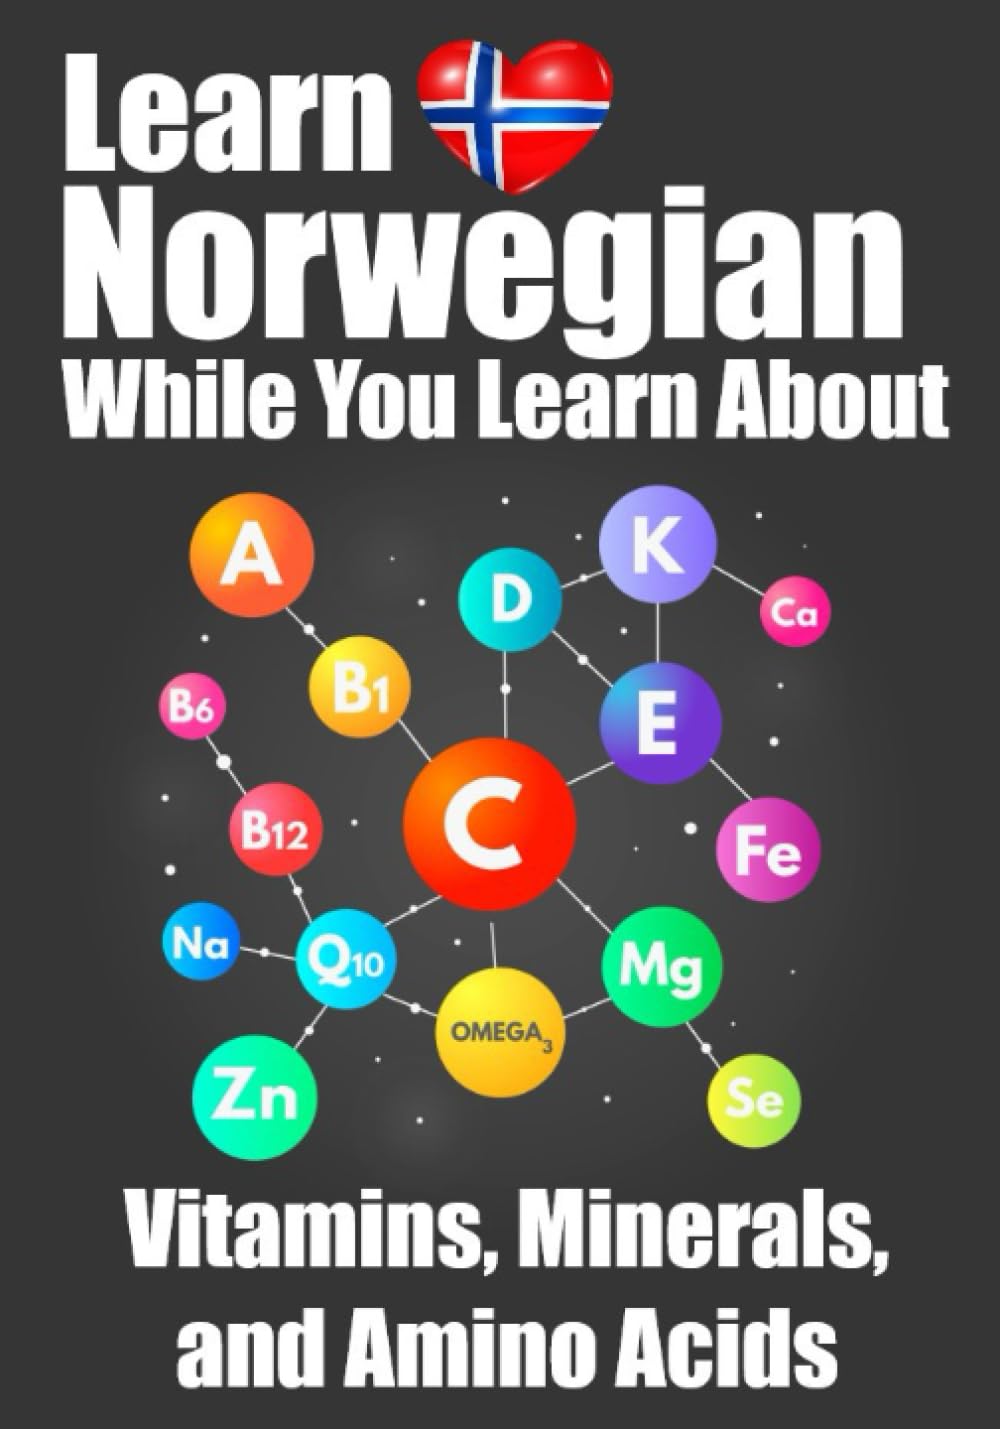 Learning About Vitamins, Minerals, and Amino Acids While You Learn Norwegian - Skriuwer.com